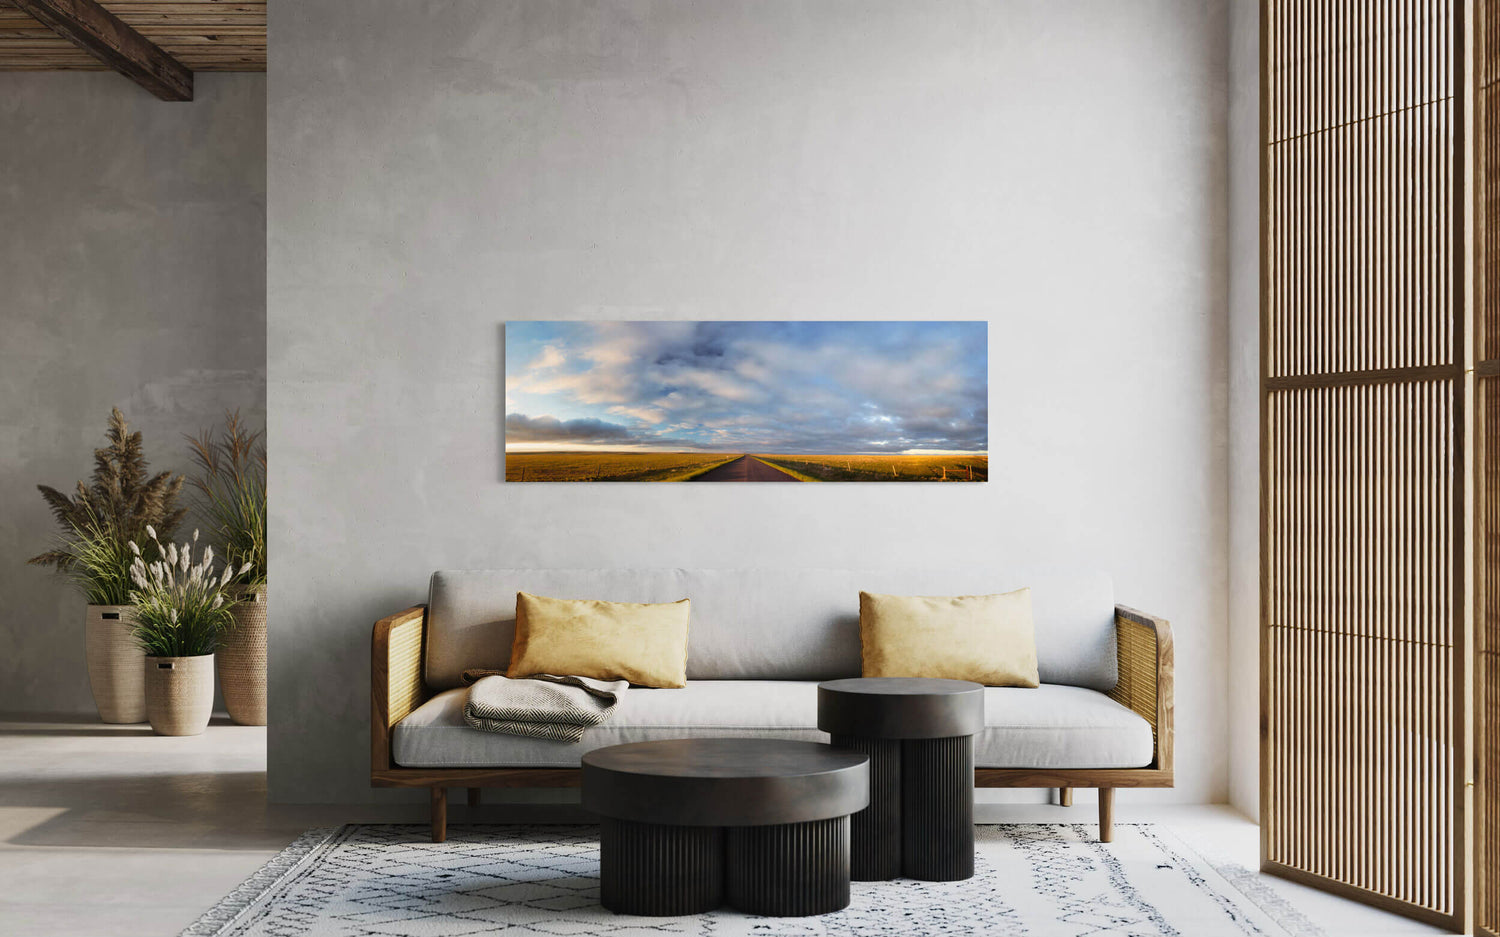 A Colorado Eastern Plains picture hangs in a living room.